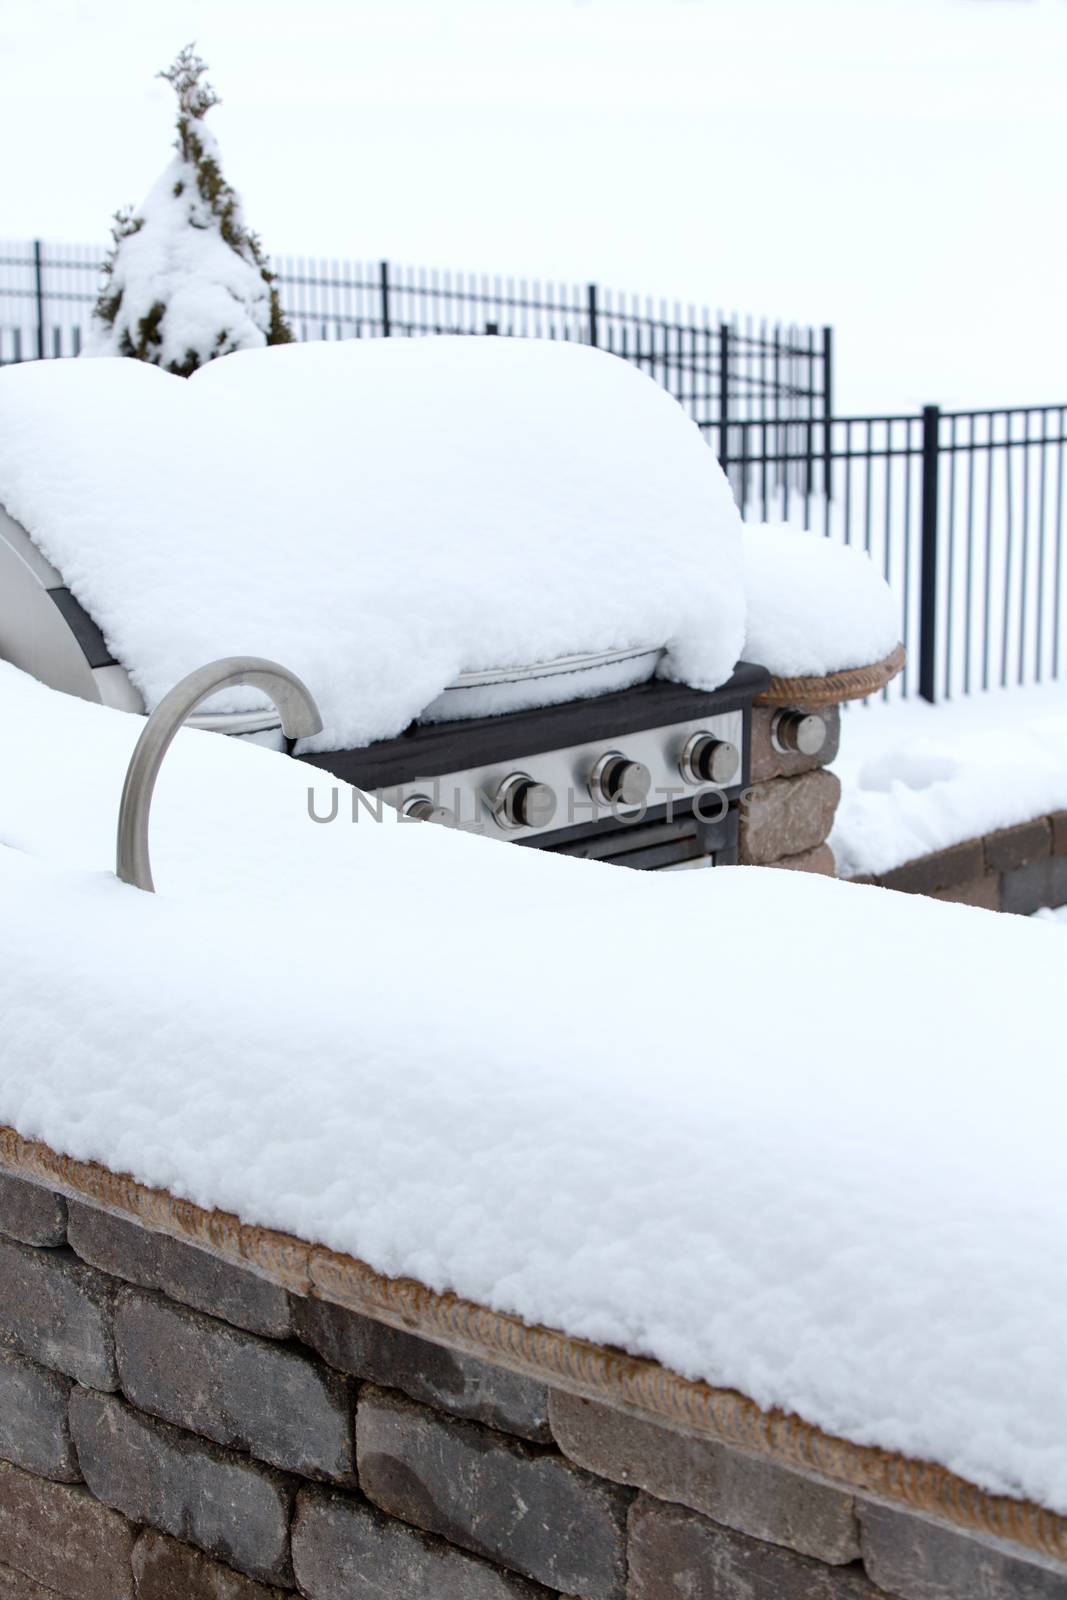 Detail of BBQ on Stone Patio Buried Beneath Heavy Snow in Winter - Disused Outdoor Kitchen Neglected Under Winter Snow in Back Yard of Home